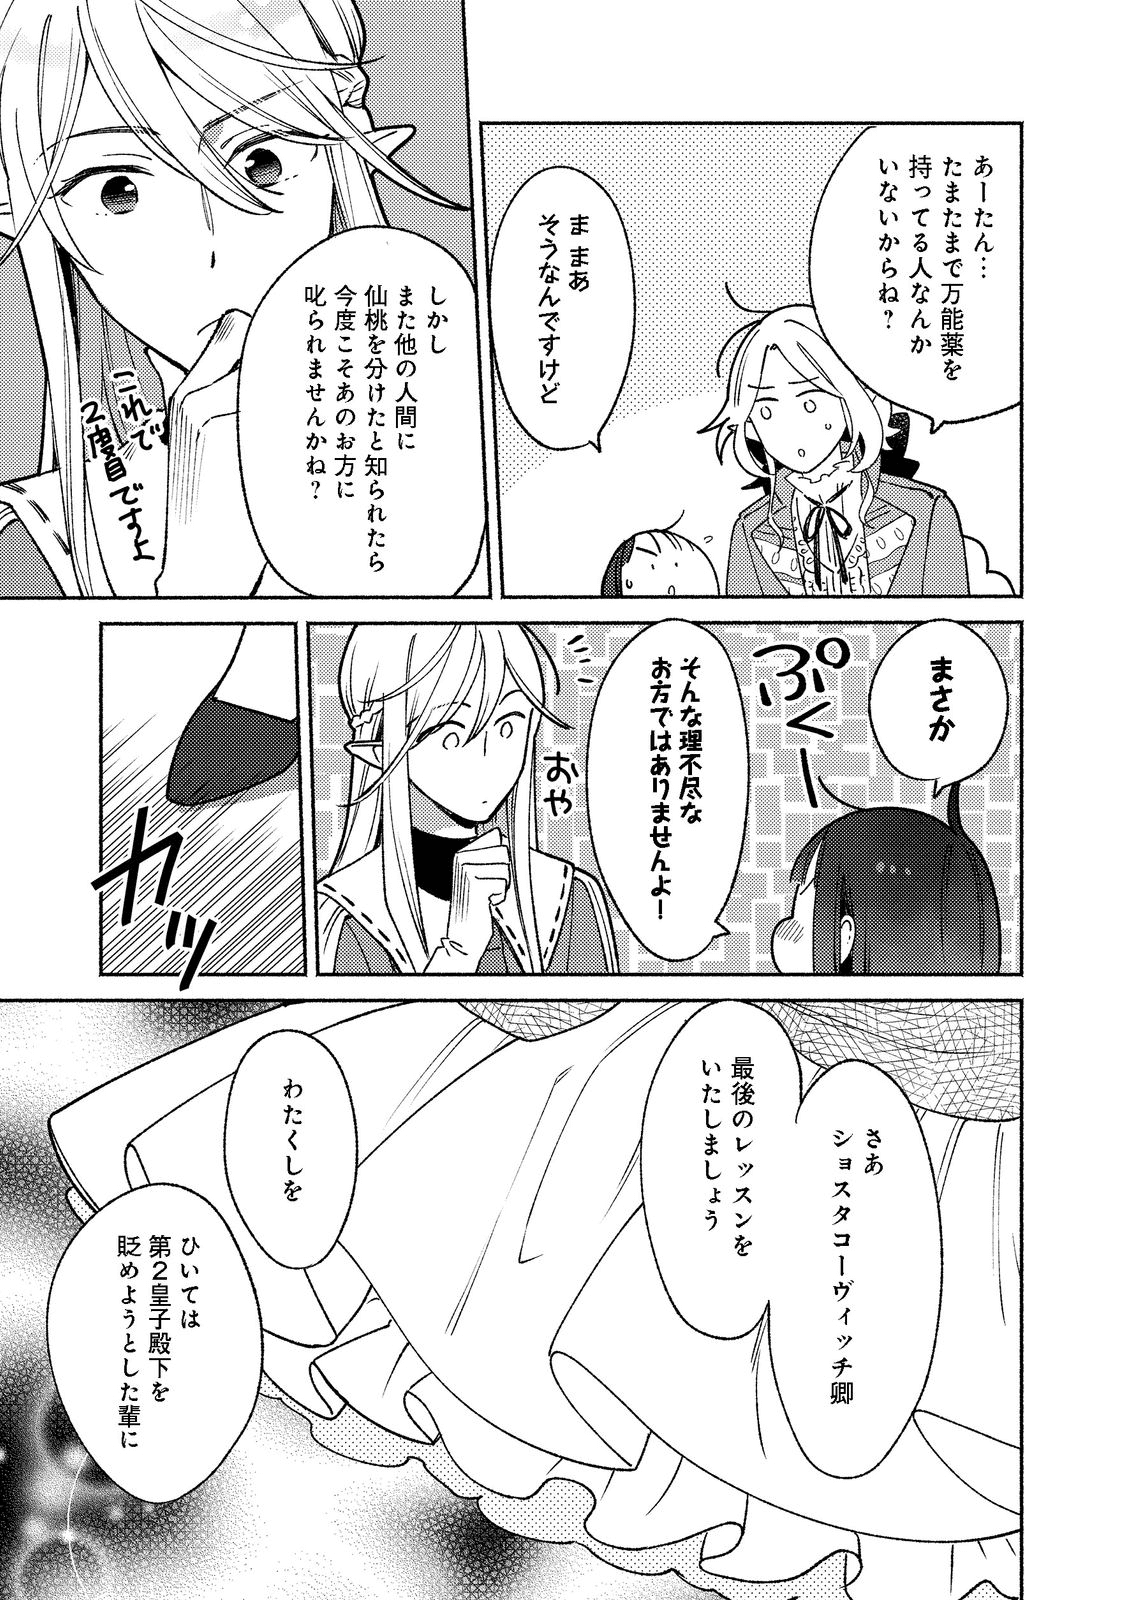 I’m the White Pig Nobleman 第15.2話 - Page 5